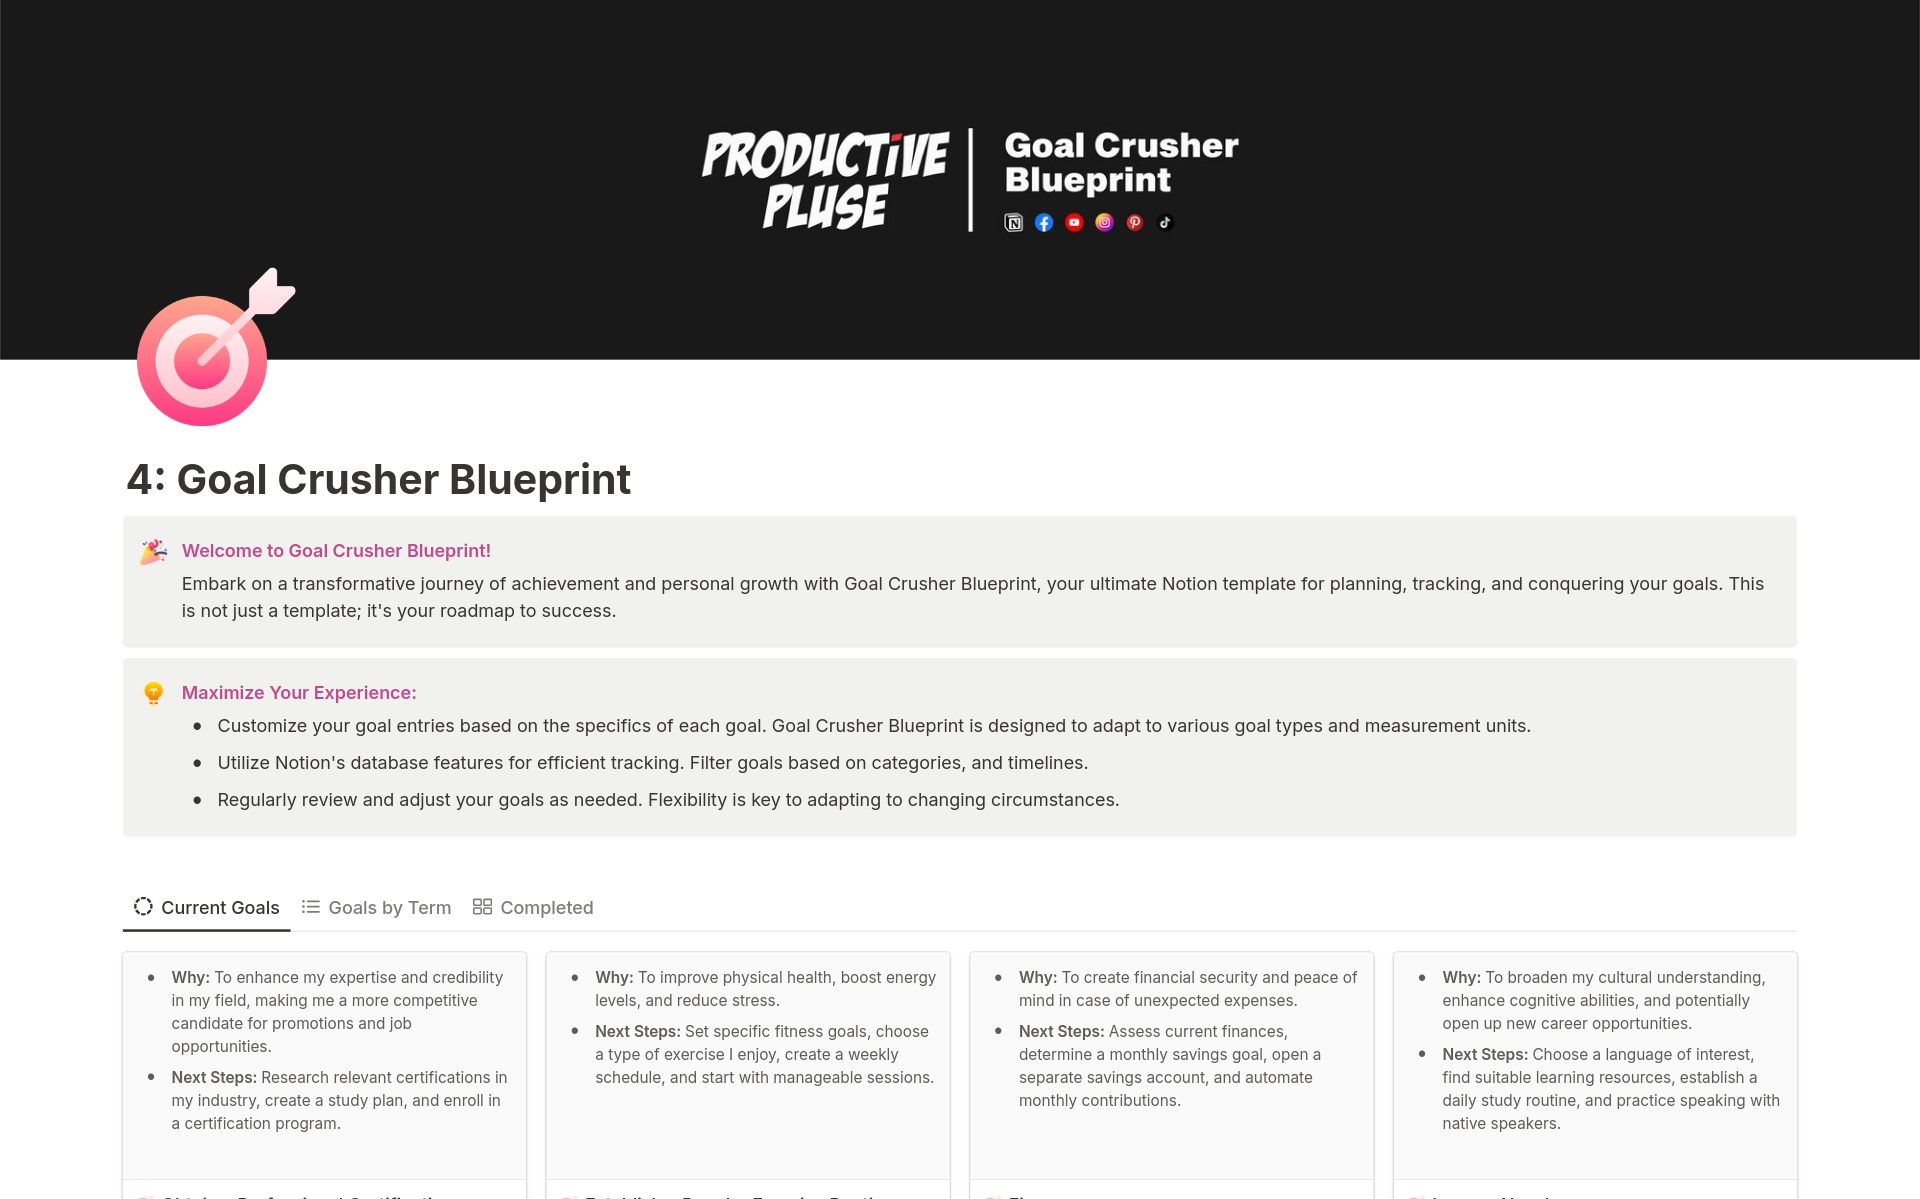 Embark on a transformative journey of achievement and personal growth with Goal Crusher Blueprint, your ultimate Notion template for planning, tracking, and conquering your goals. This is not just a template; it's your roadmap to success.